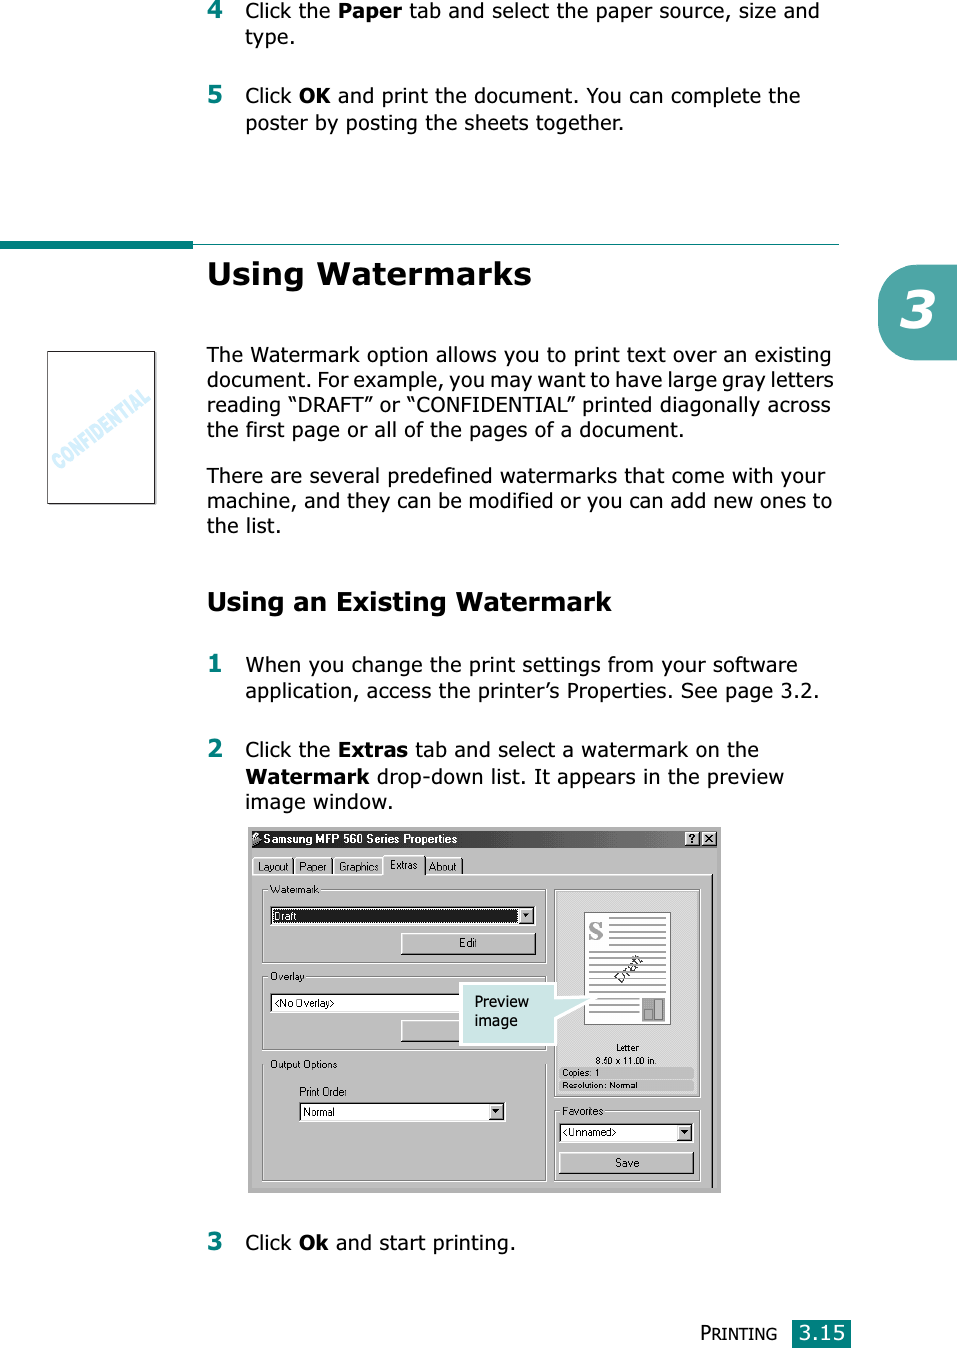 PRINTING3.1534Click the Paper tab and select the paper source, size and type.5Click OK and print the document. You can complete the poster by posting the sheets together. Using WatermarksThe Watermark option allows you to print text over an existing document. For example, you may want to have large gray letters reading “DRAFT” or “CONFIDENTIAL” printed diagonally across the first page or all of the pages of a document. There are several predefined watermarks that come with your machine, and they can be modified or you can add new ones to the list. Using an Existing Watermark1When you change the print settings from your software application, access the printer’s Properties. See page 3.2. 2Click the Extras tab and select a watermark on the Watermark drop-down list. It appears in the preview image window. 3Click Ok and start printing. Preview image